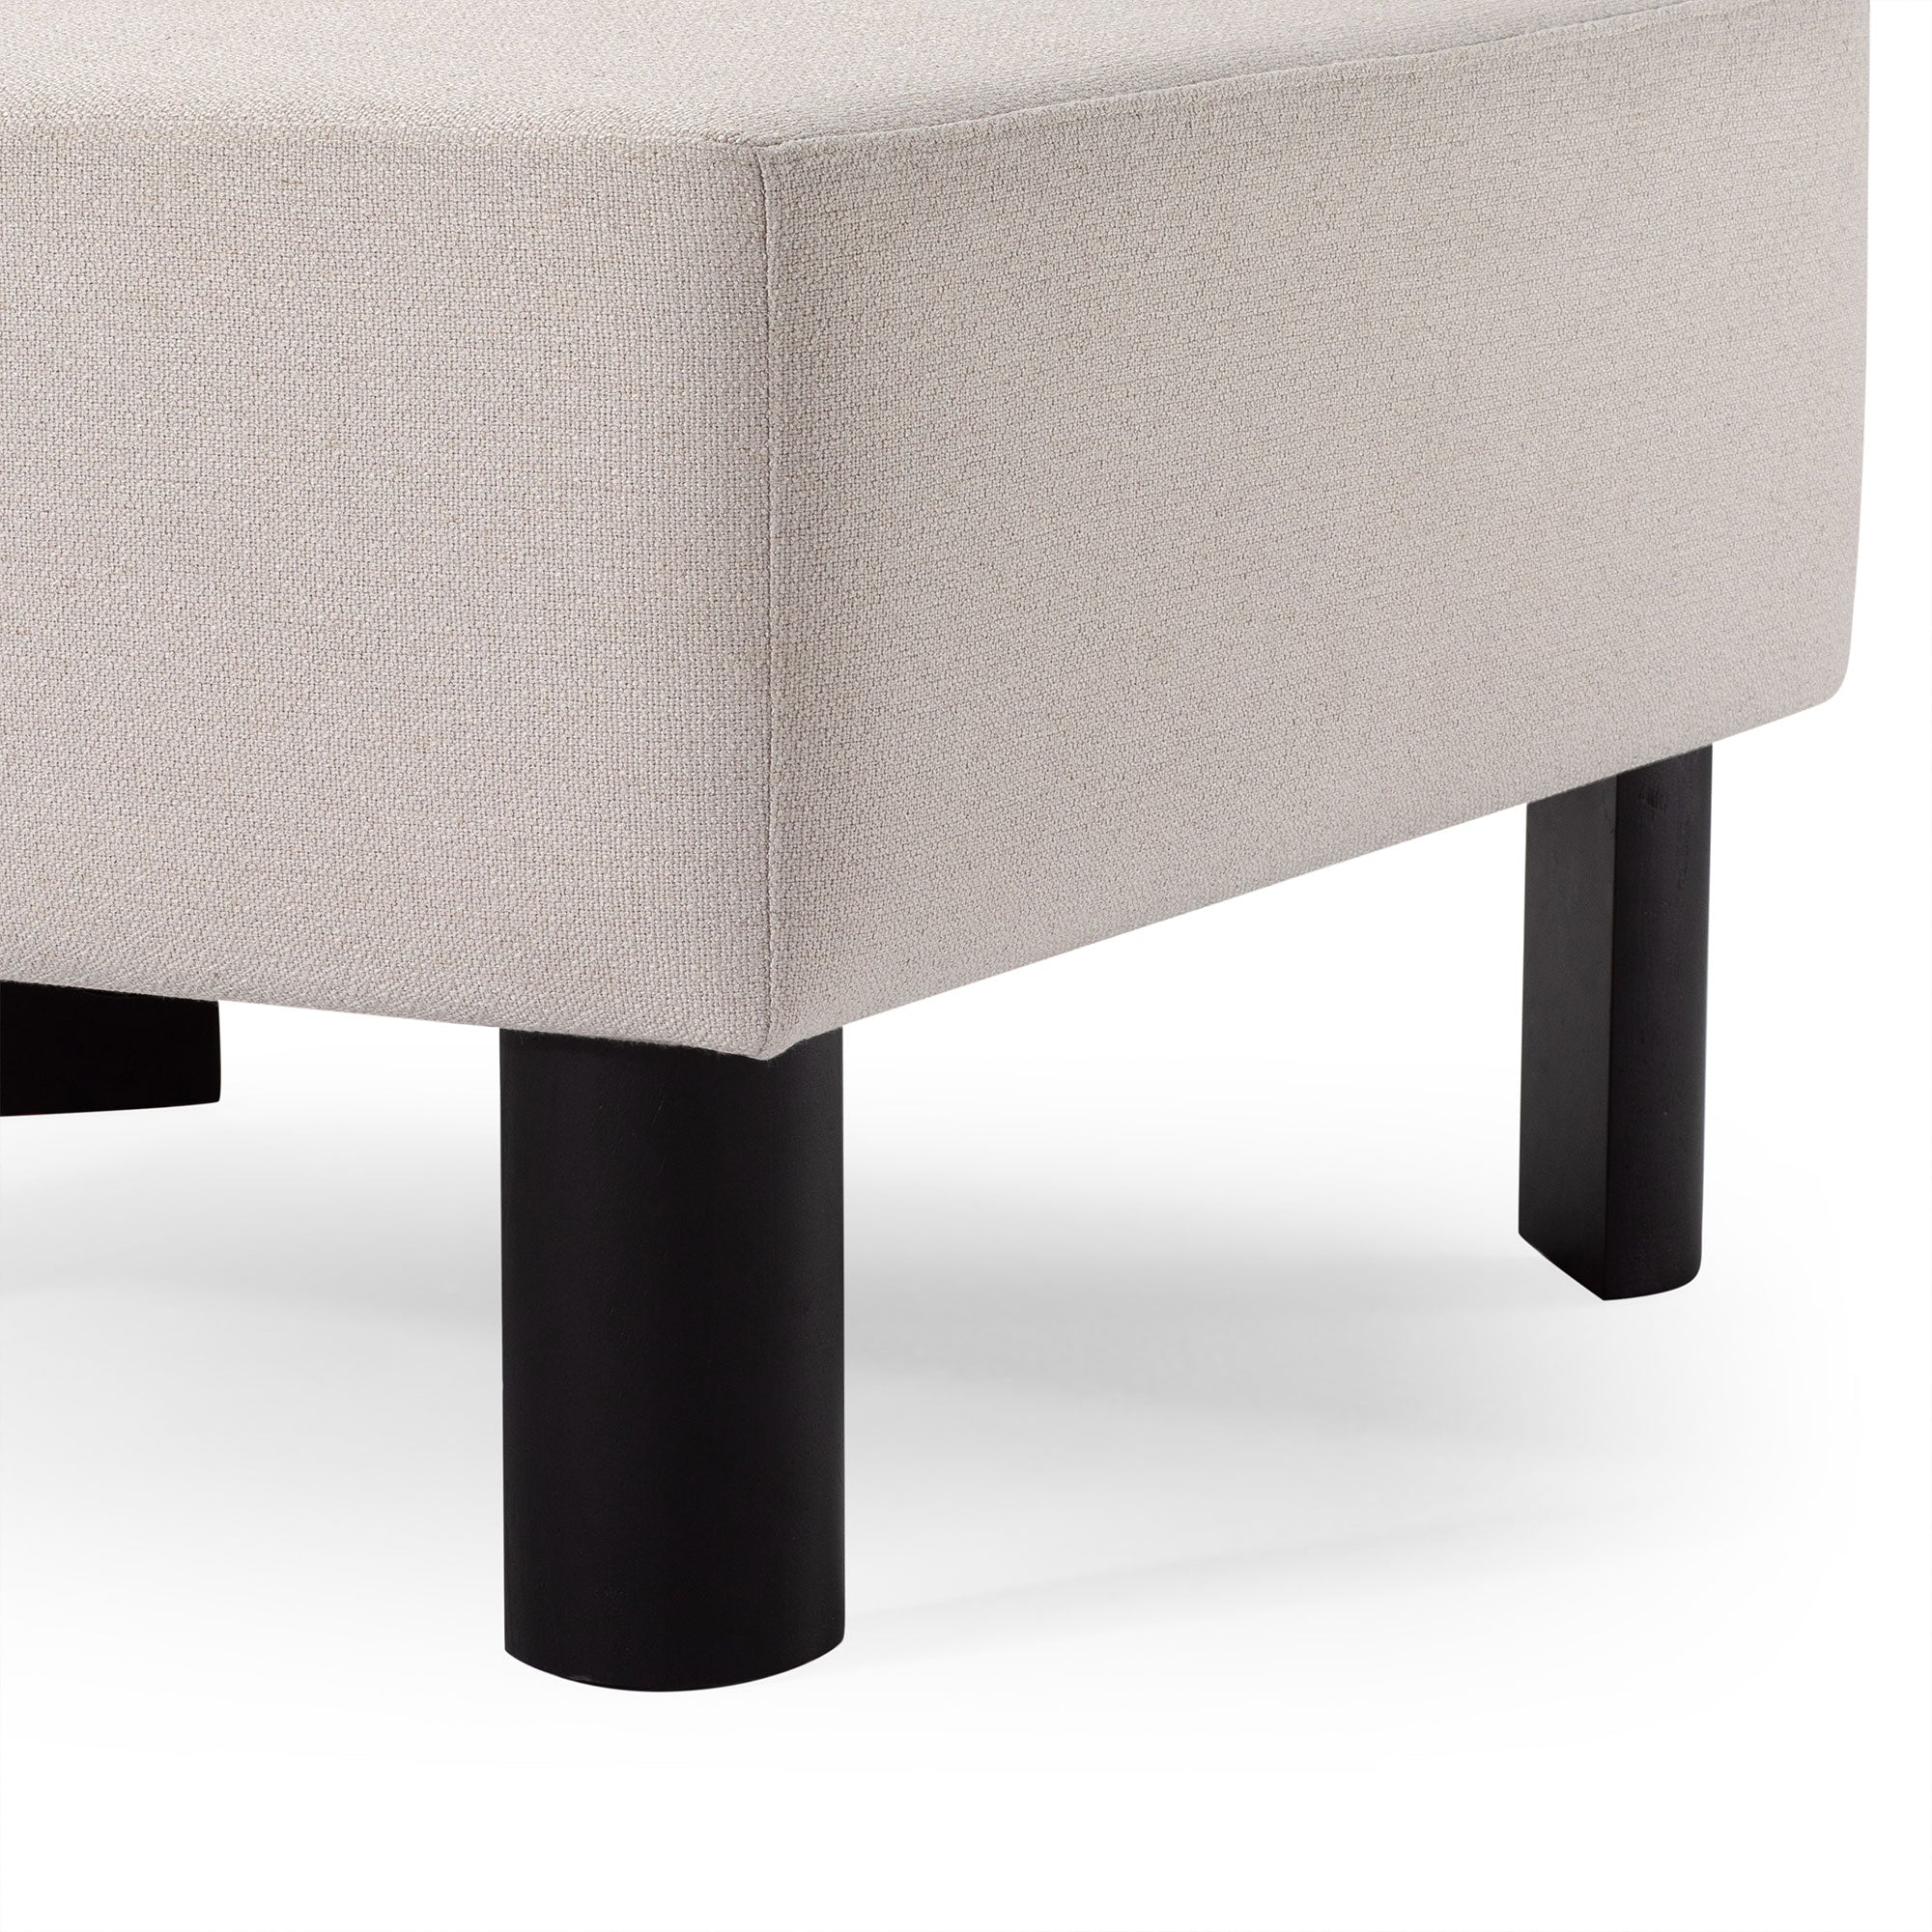 Lena Contemporary Upholstered Ottoman with Refined Black Wood Finish in Ottomans & Benches by Maven Lane